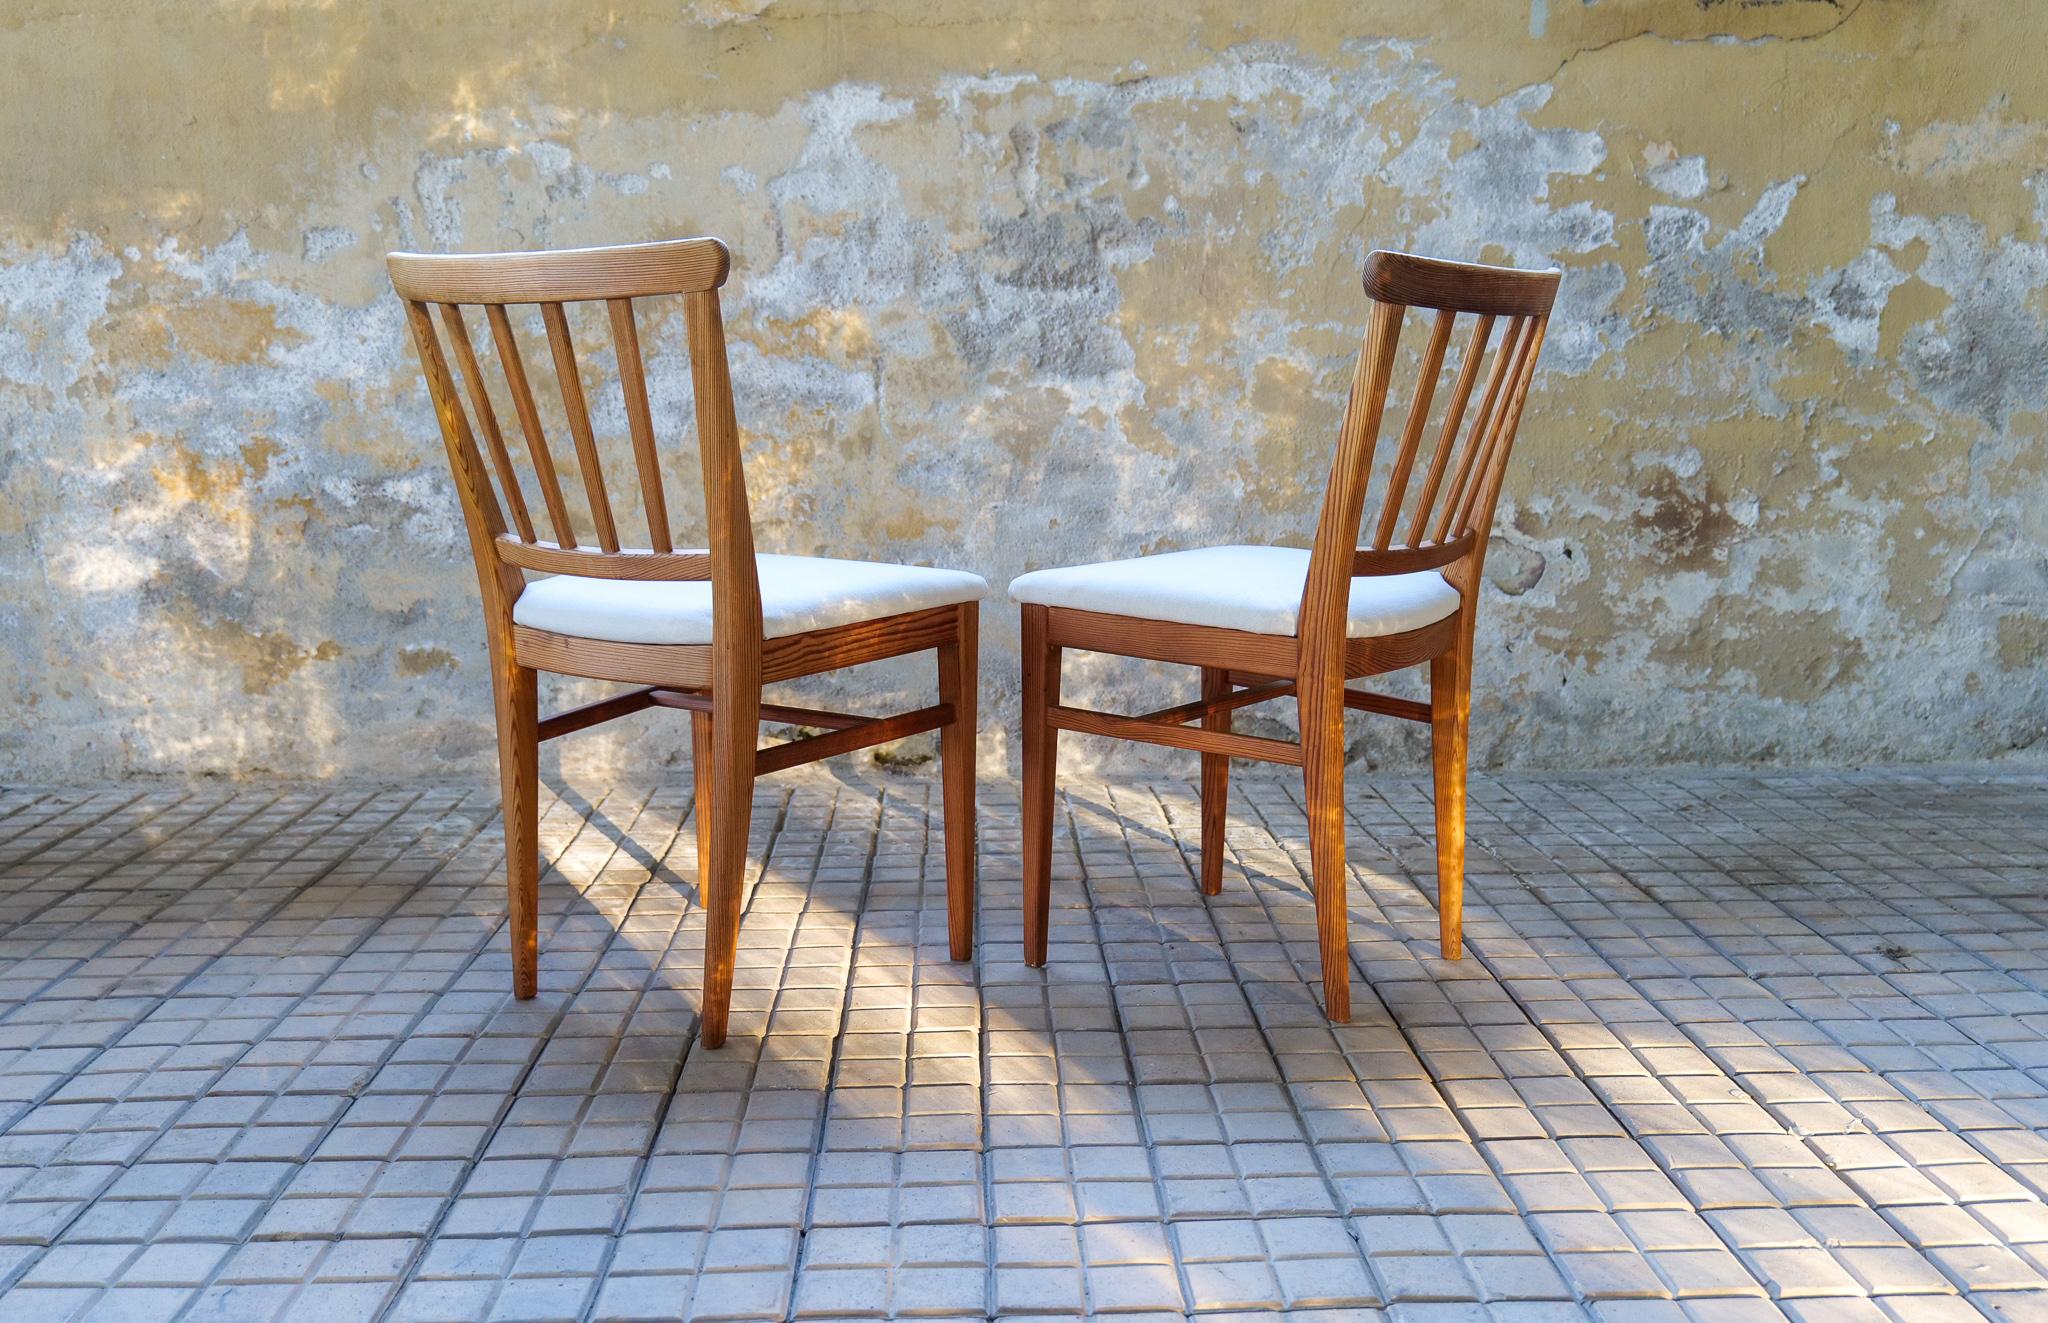 Midcentury Set of 4 Carl Malmsten Chairs Dining in Pine, Sweden, 1940s For Sale 2